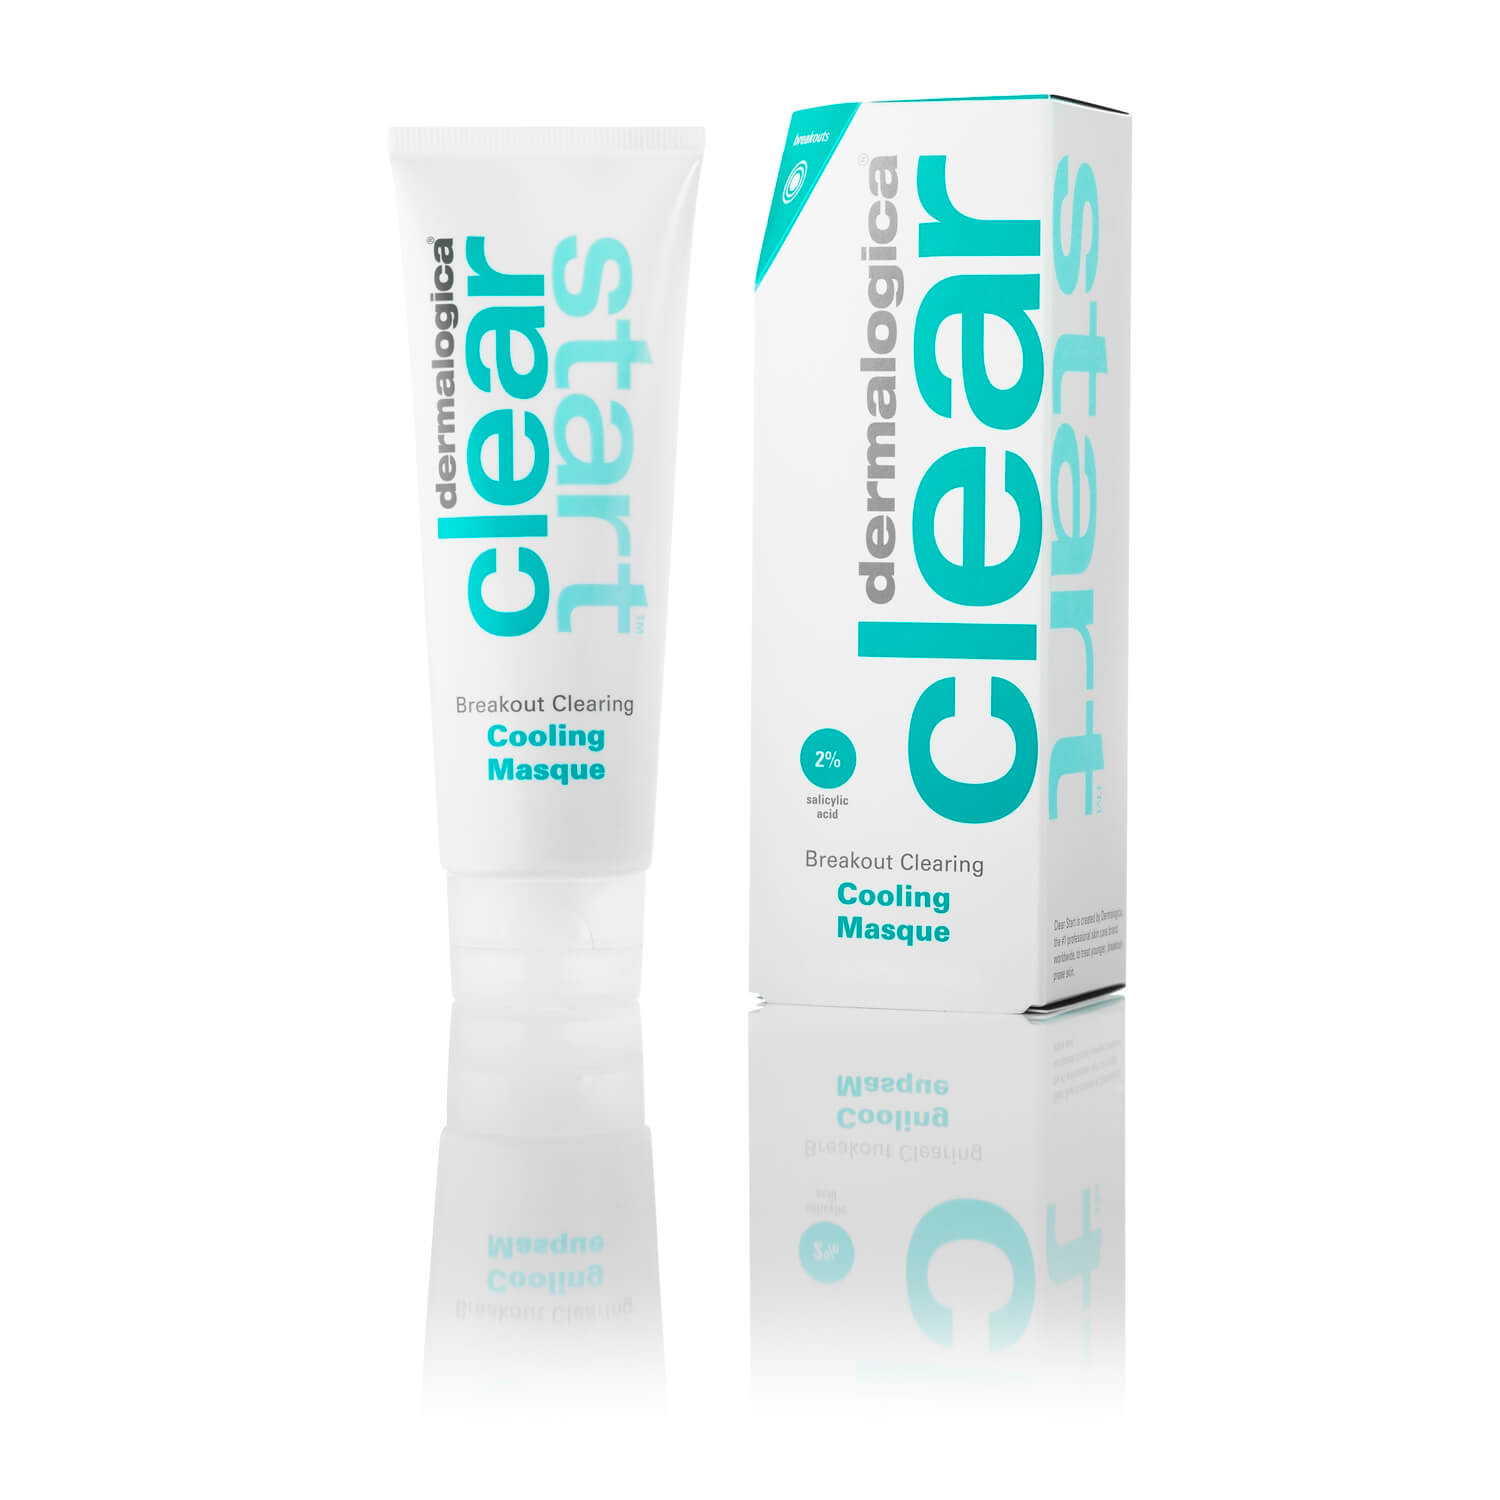 Dermalogica Clear Start Breakout Clearing Cooling Masque